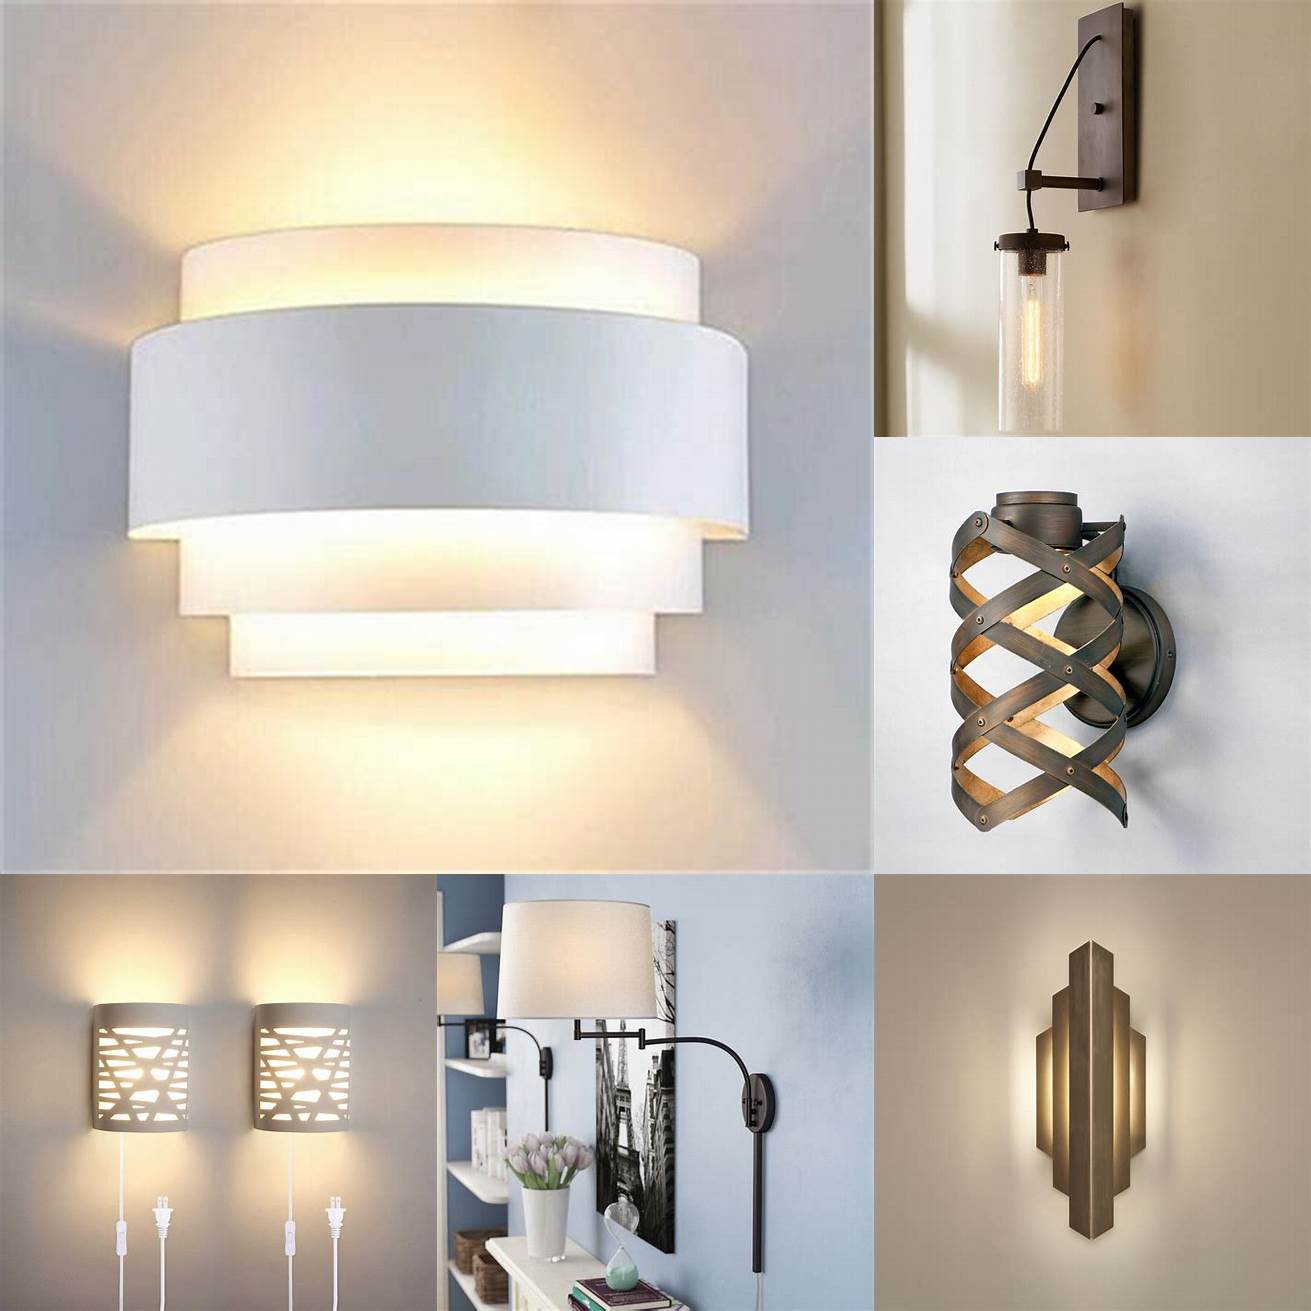 Wall sconces for ambient lighting